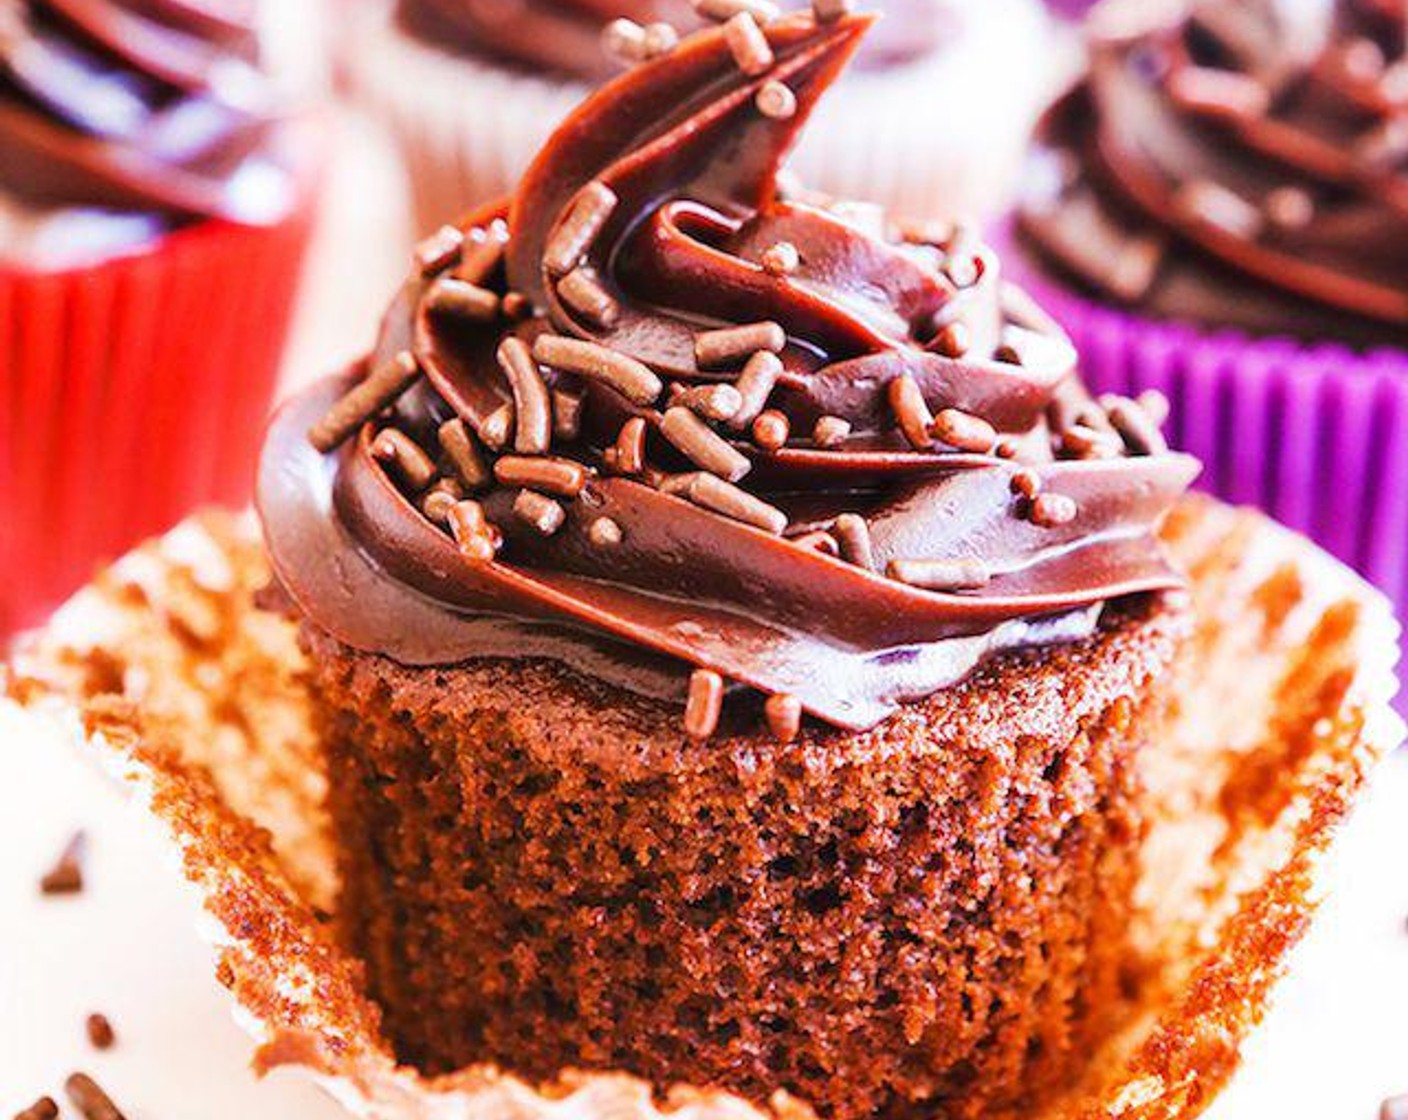 Perfect Chocolate Cupcakes with Chocolate Ganache Frosting